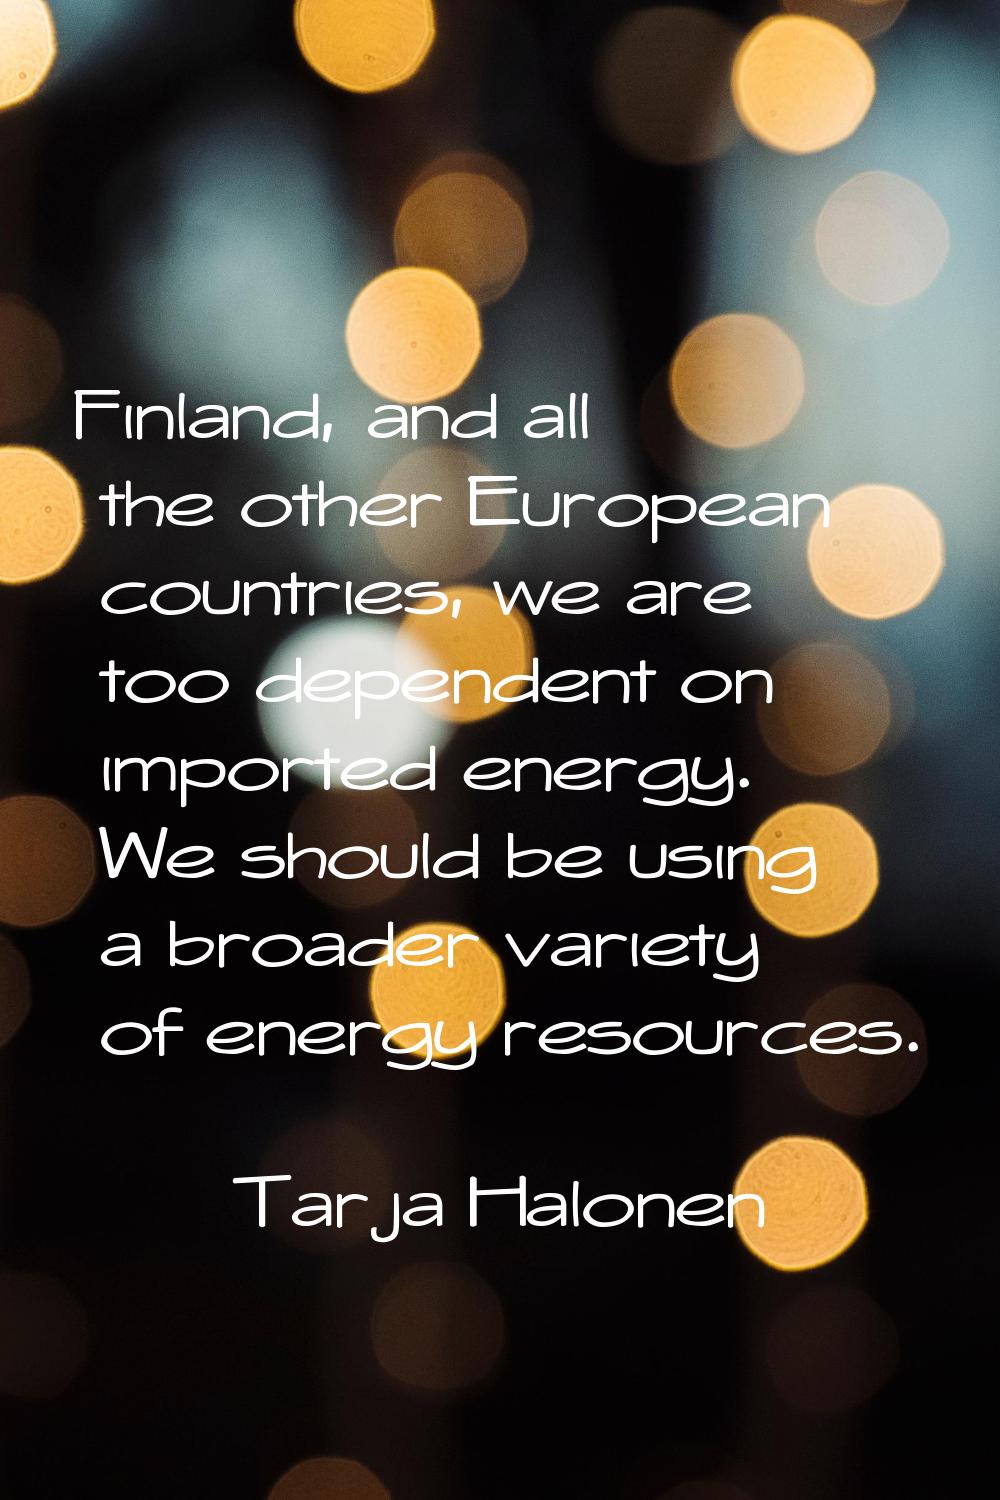 Finland, and all the other European countries, we are too dependent on imported energy. We should b